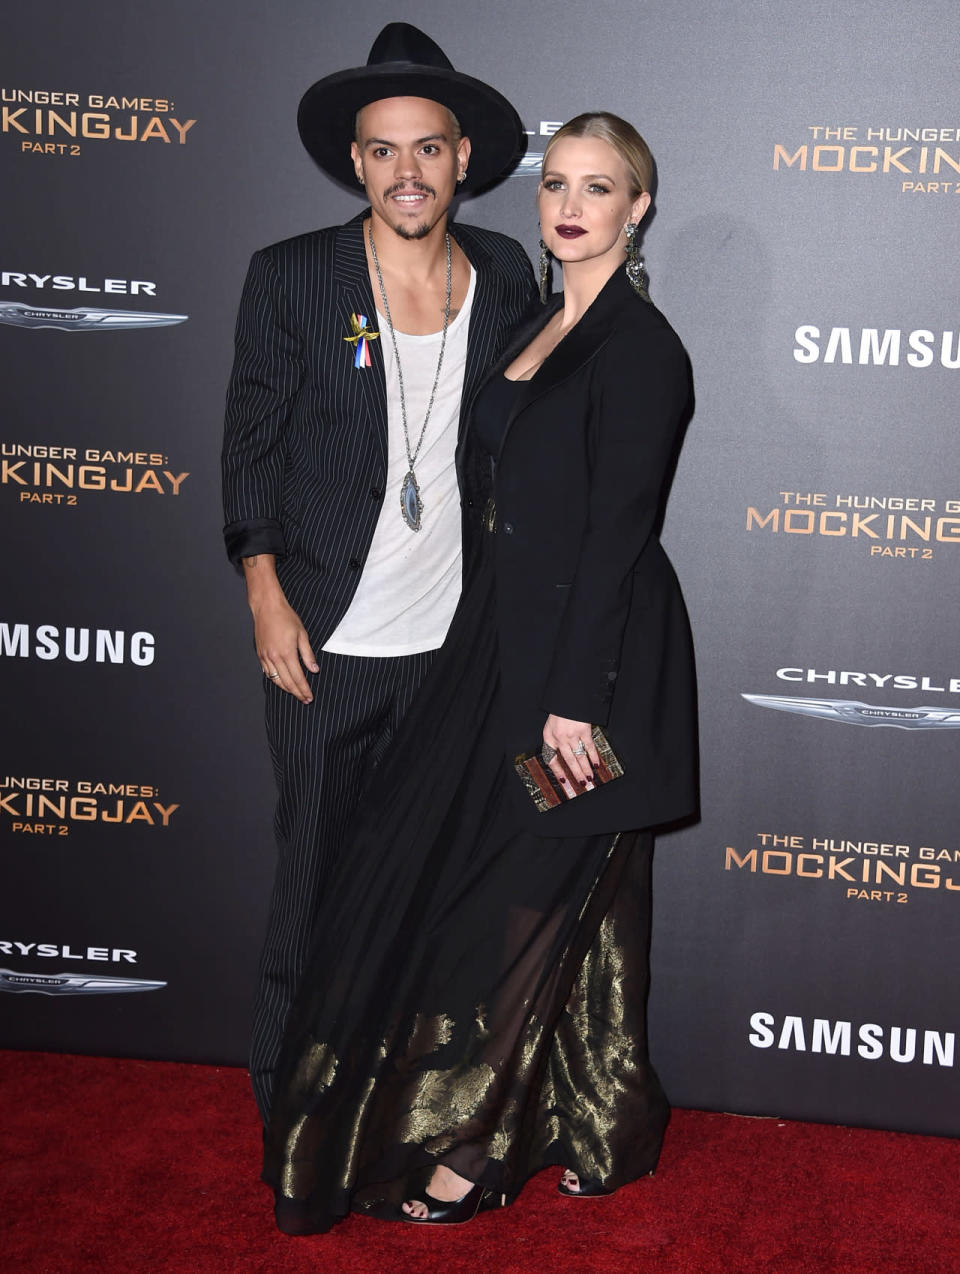 Ashlee Simpson Ross in Etro with her husband, Evan Ross, at the premiere of “The Hunger Games: Mockingjay - Part 2″ in Los Angeles, California.